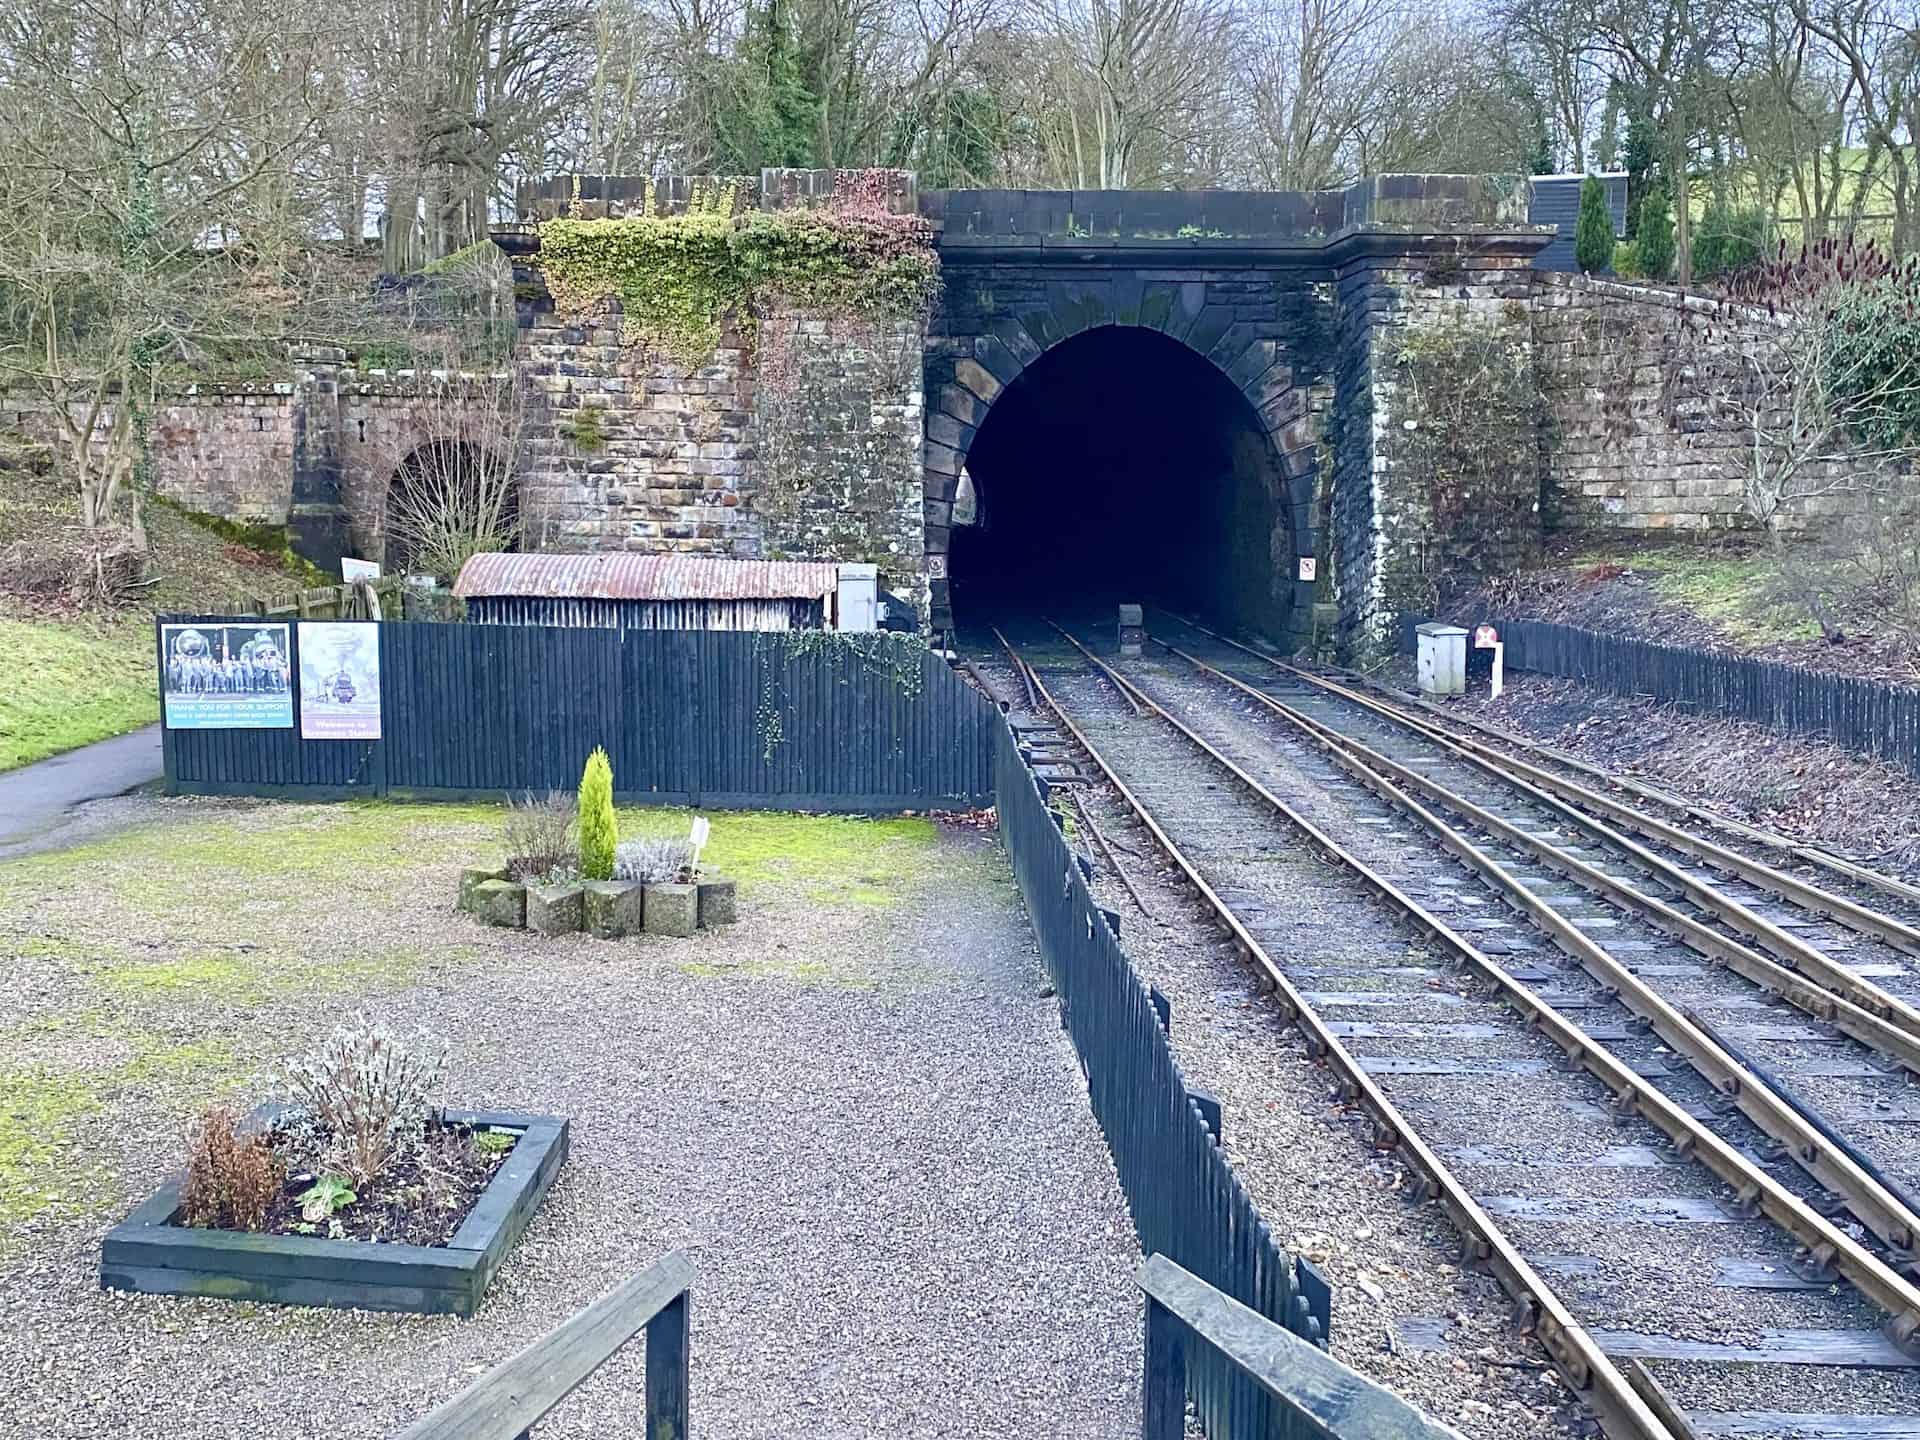 Grosmont lies on the Whitby to Pickering railway line, which was built by George Stephenson and opened over its full length on 26 May 1836. There are two adjacent railway tunnels to the south of the village. The first carriages to run through the earlier, smaller tunnel were pulled by horses and carried up to 10 people.